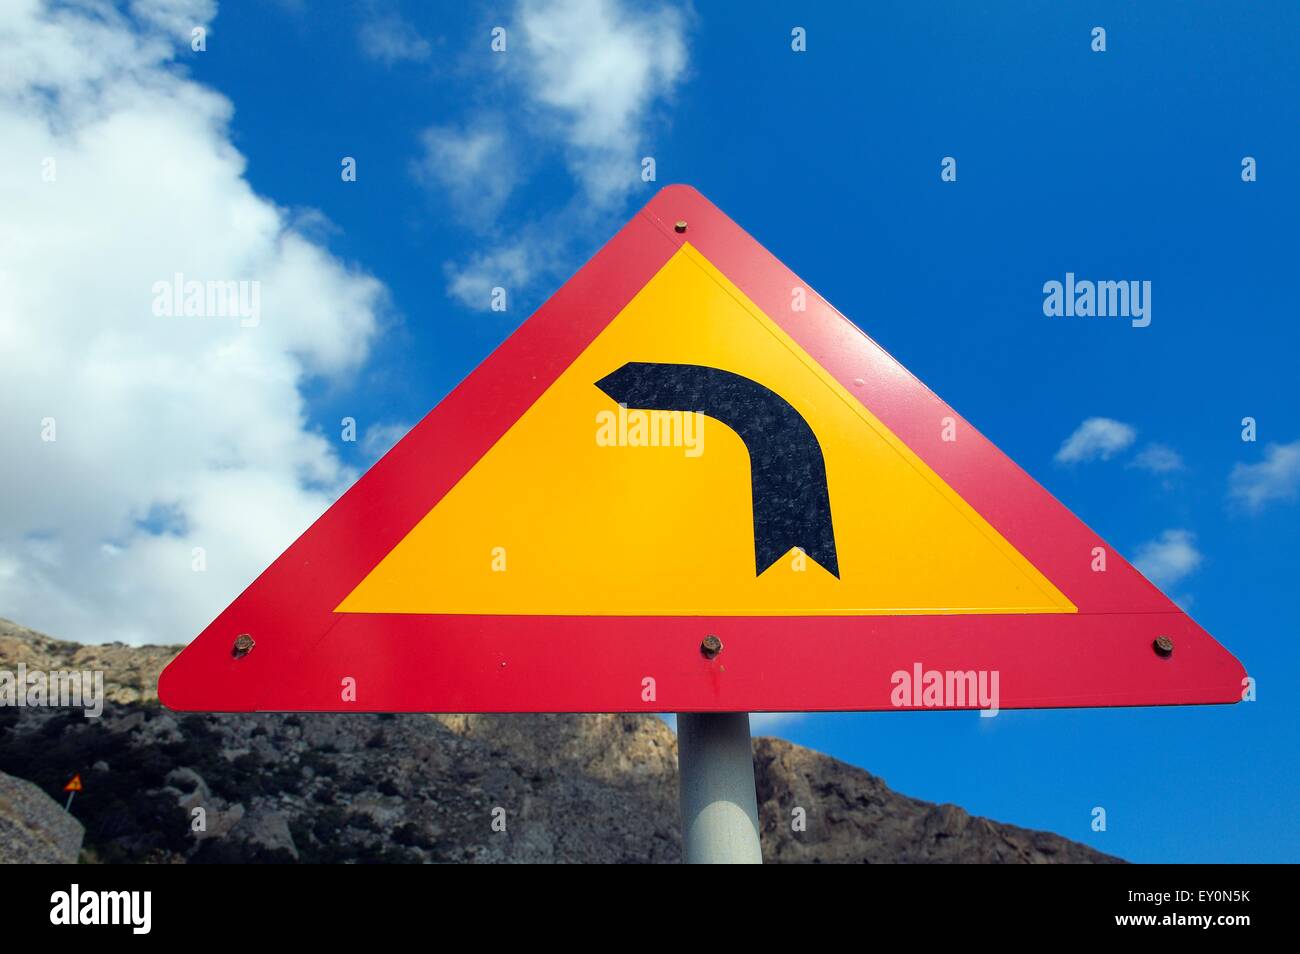 A road sign indicating left turning bend ahead Stock Photo